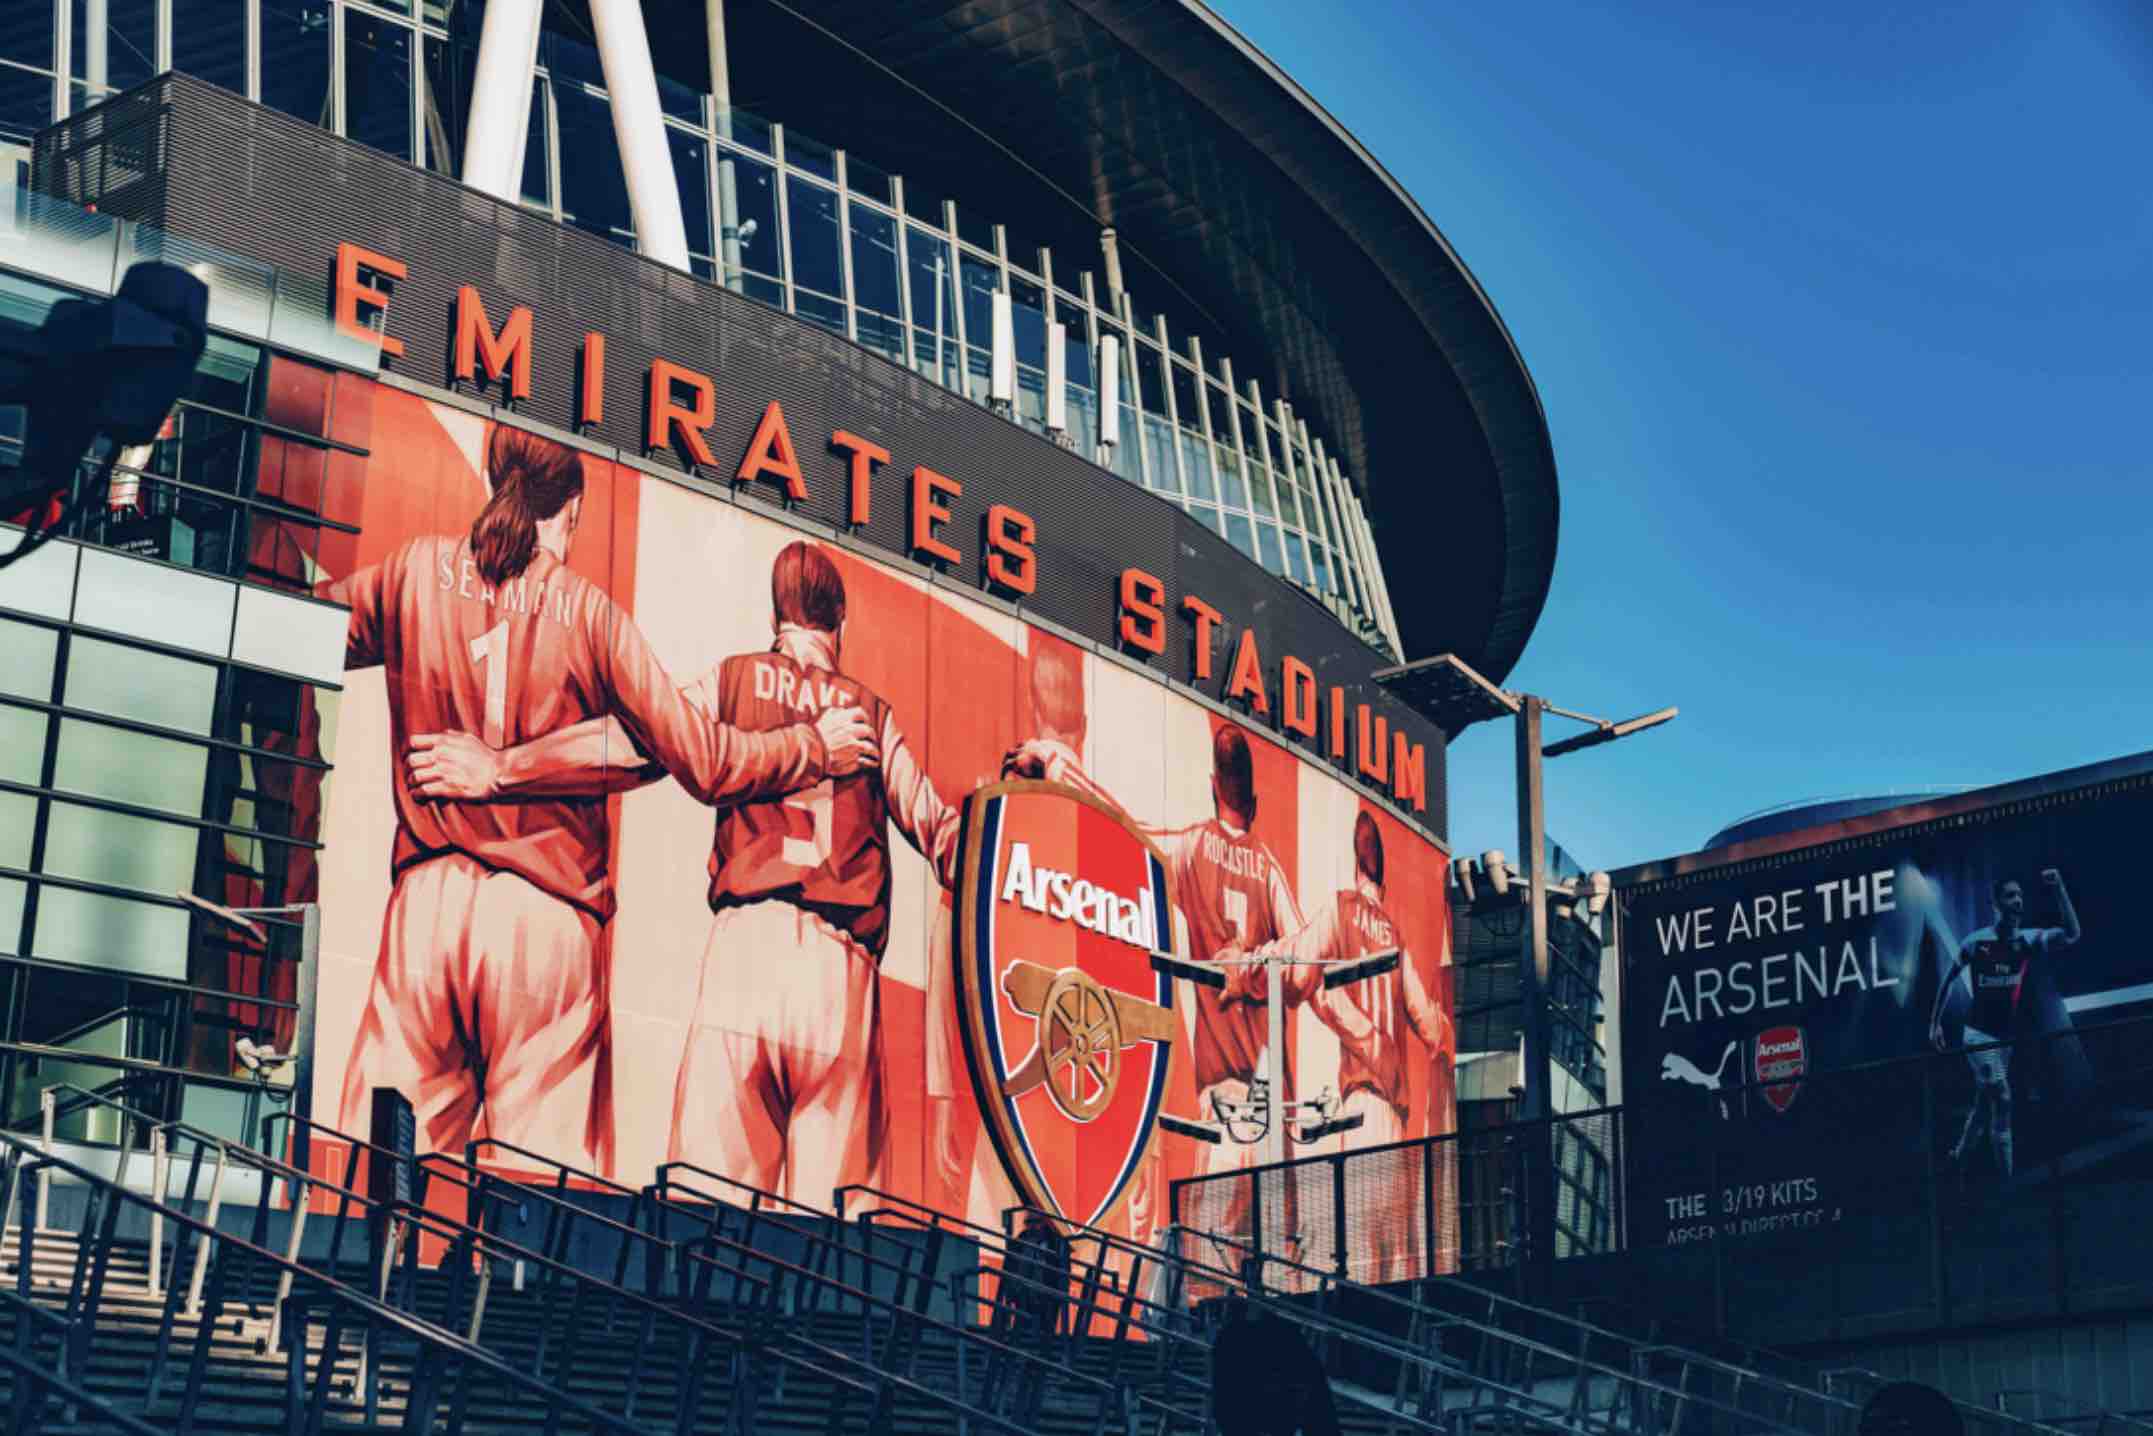 Arsenal FC’s Charity Builds Community In North London, Abroad